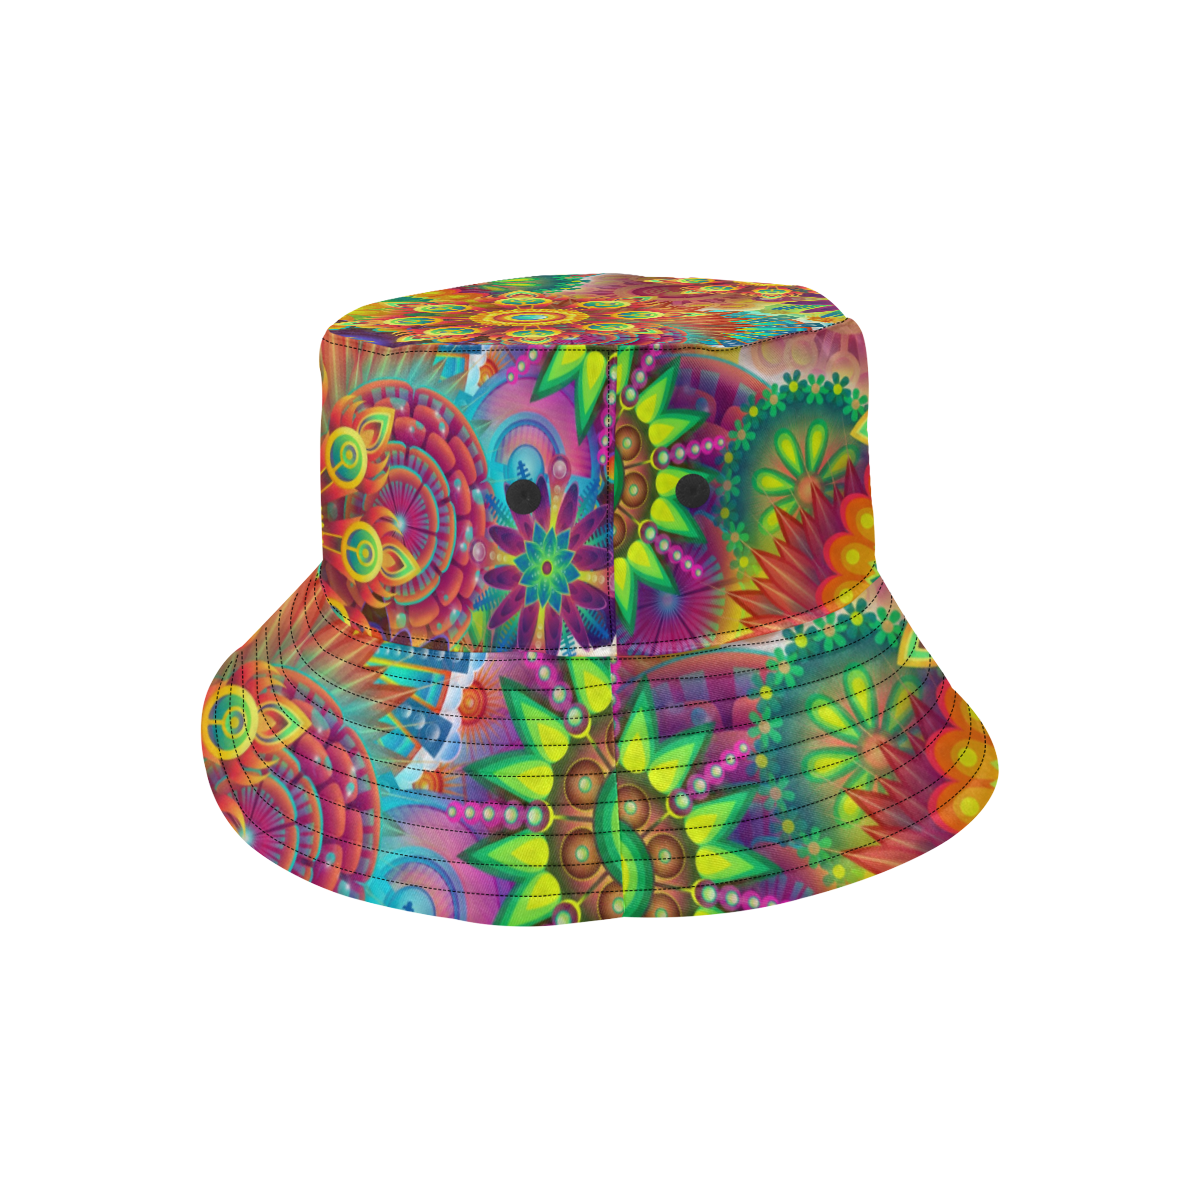 Psychedelic Mandalas All Over Print Bucket Hat